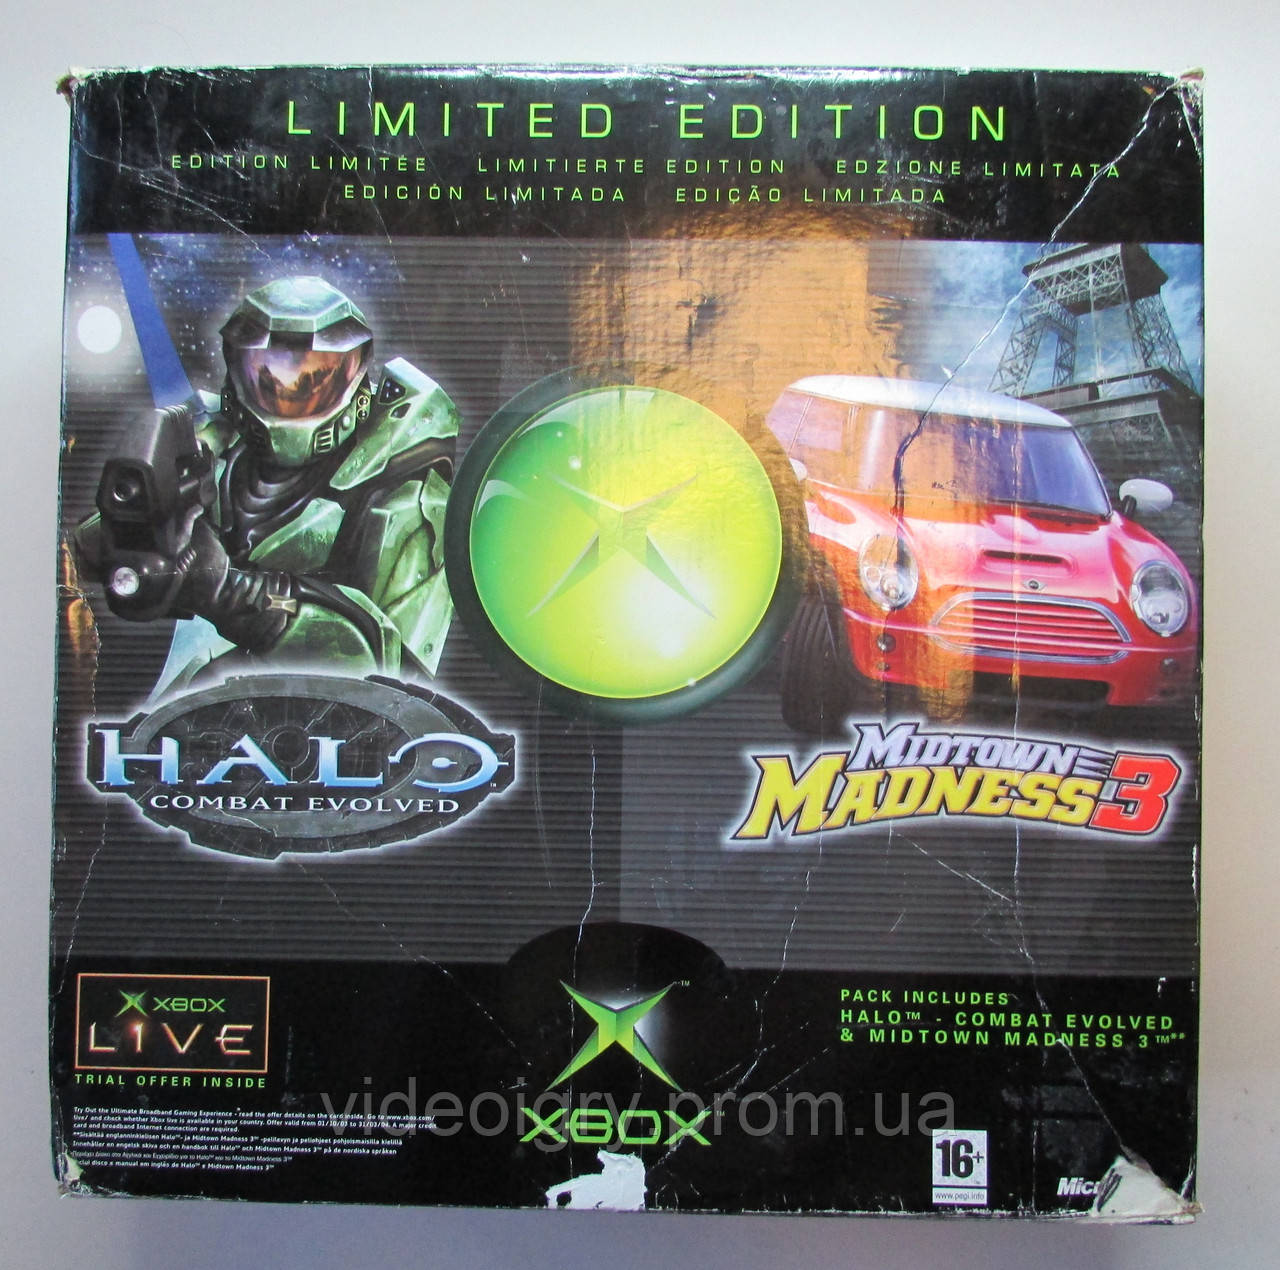 XBOX Video Game System Microsoft Limited Edition Bandle Halo & Midtown Madness 3 PAL (EUR) БО (не прошитий)